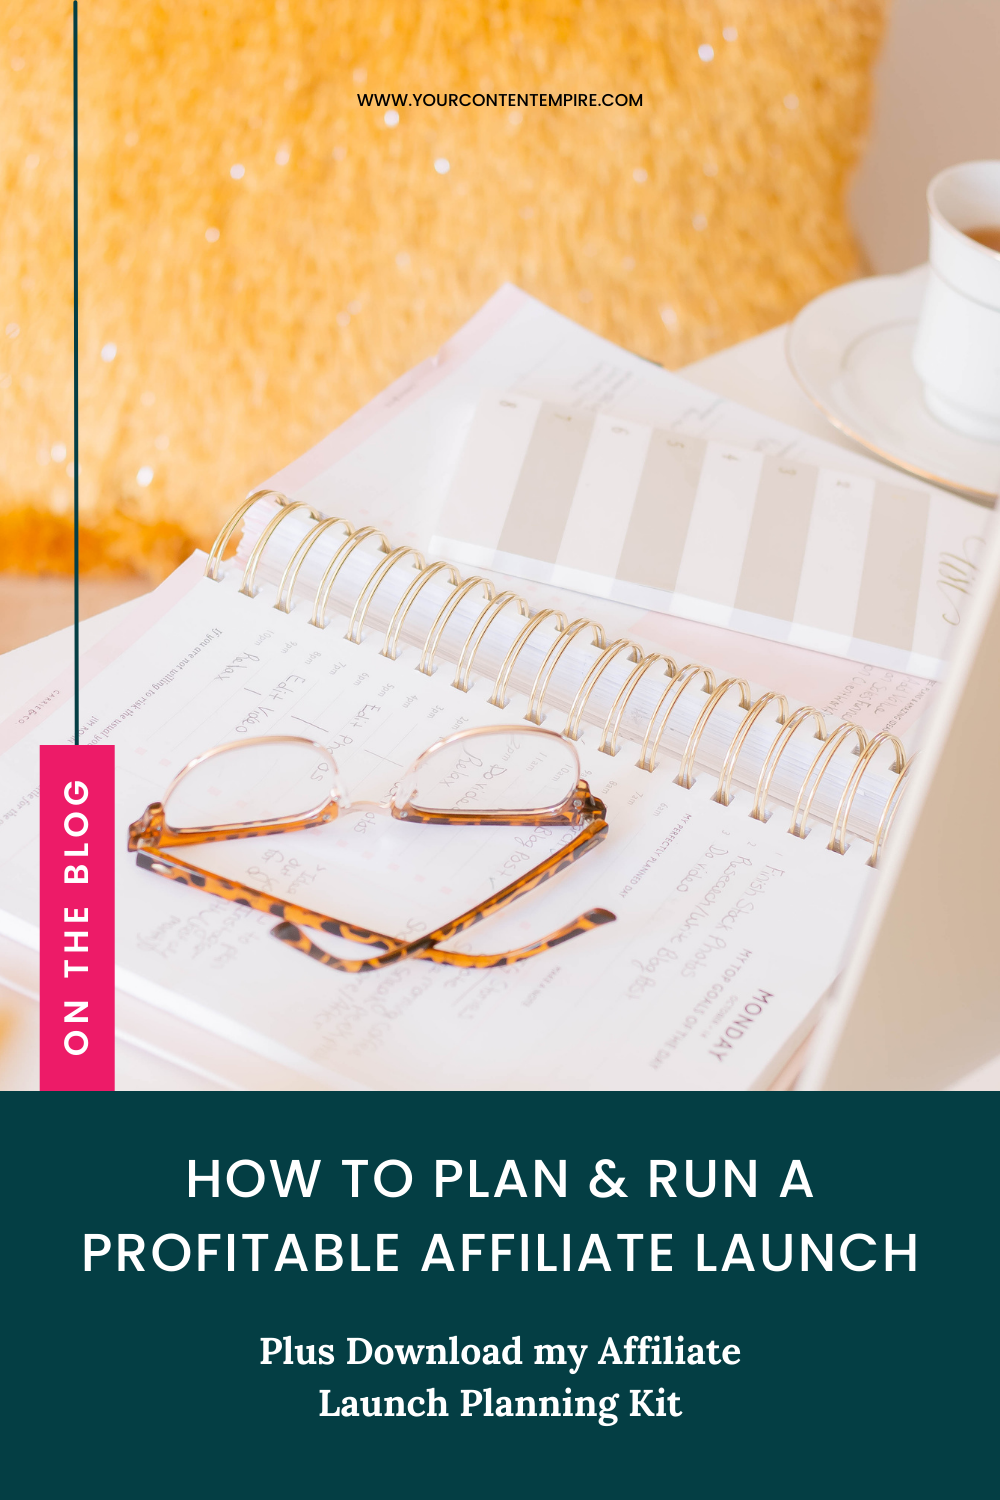 How To Plan & Run A Profitable Affiliate Launch